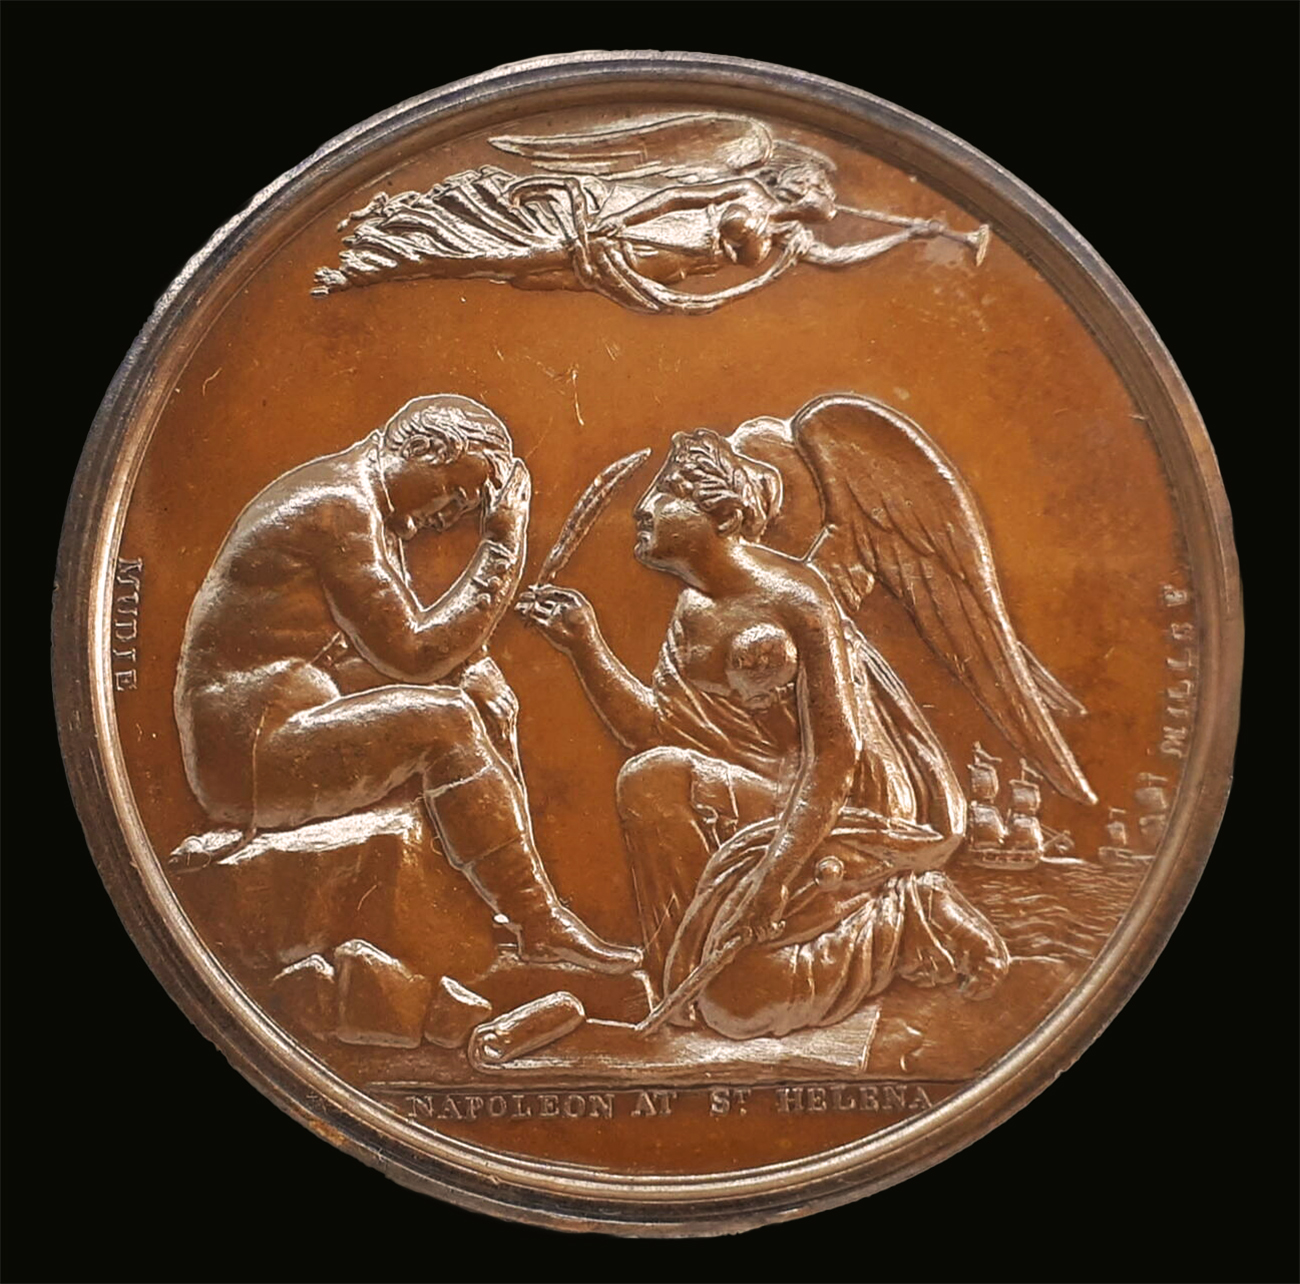 A bronze medallion depicting a despondent Napoleon, seated in a thoughtful pose, is reminded of his duties by History kneeling before him. The inscription 'Napoleon at St. Helena' is engraved at the bottom.